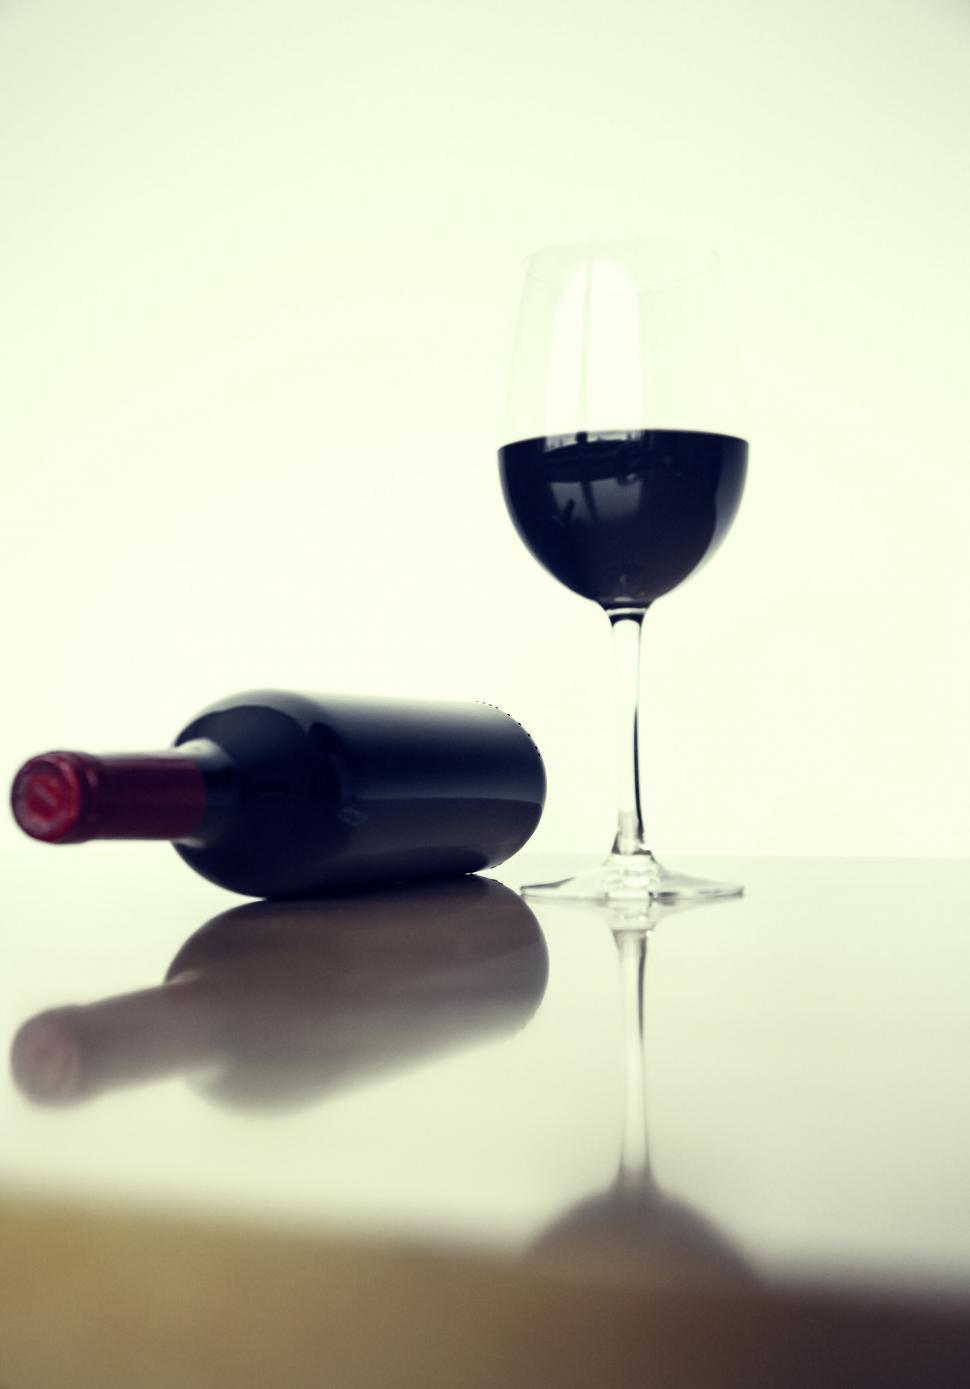 Free Image of Wine bottle and glass silhouette on a table 